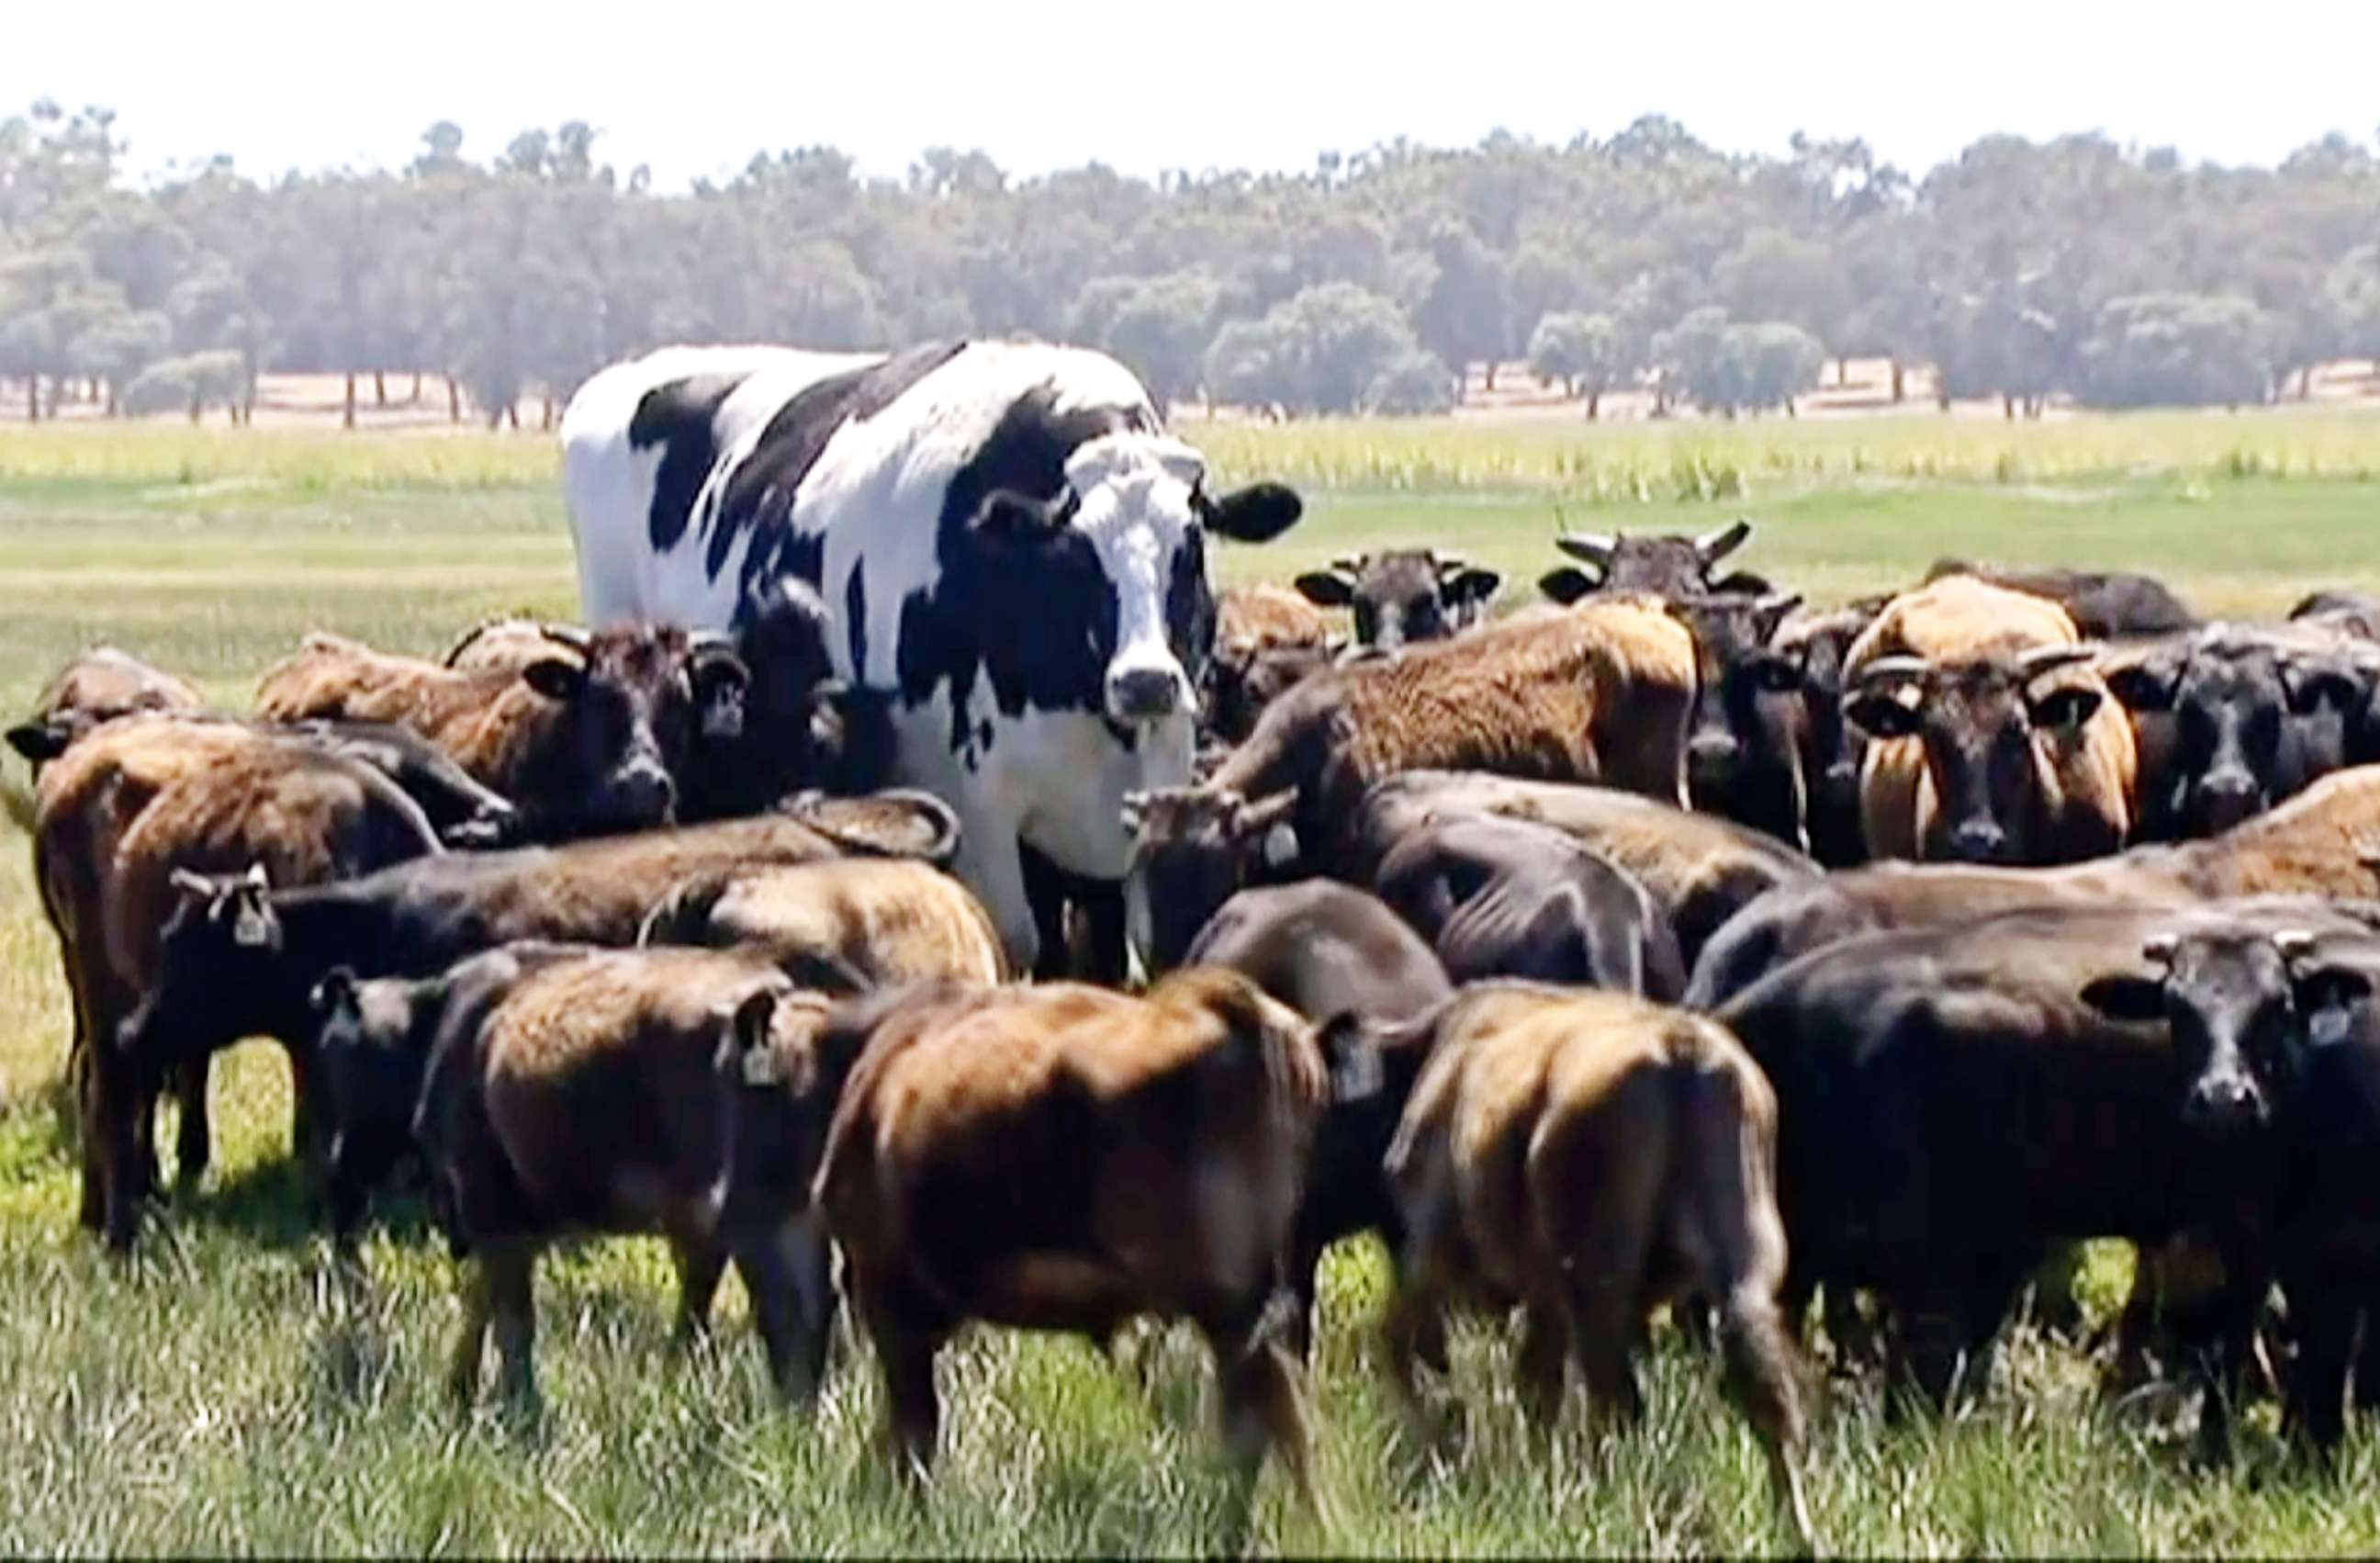 PHOTO: In this image made from video taken Nov. 15, 2018, Knickers the steer, center back, is pictured with a herd of cows in Lake Preston, Australia.